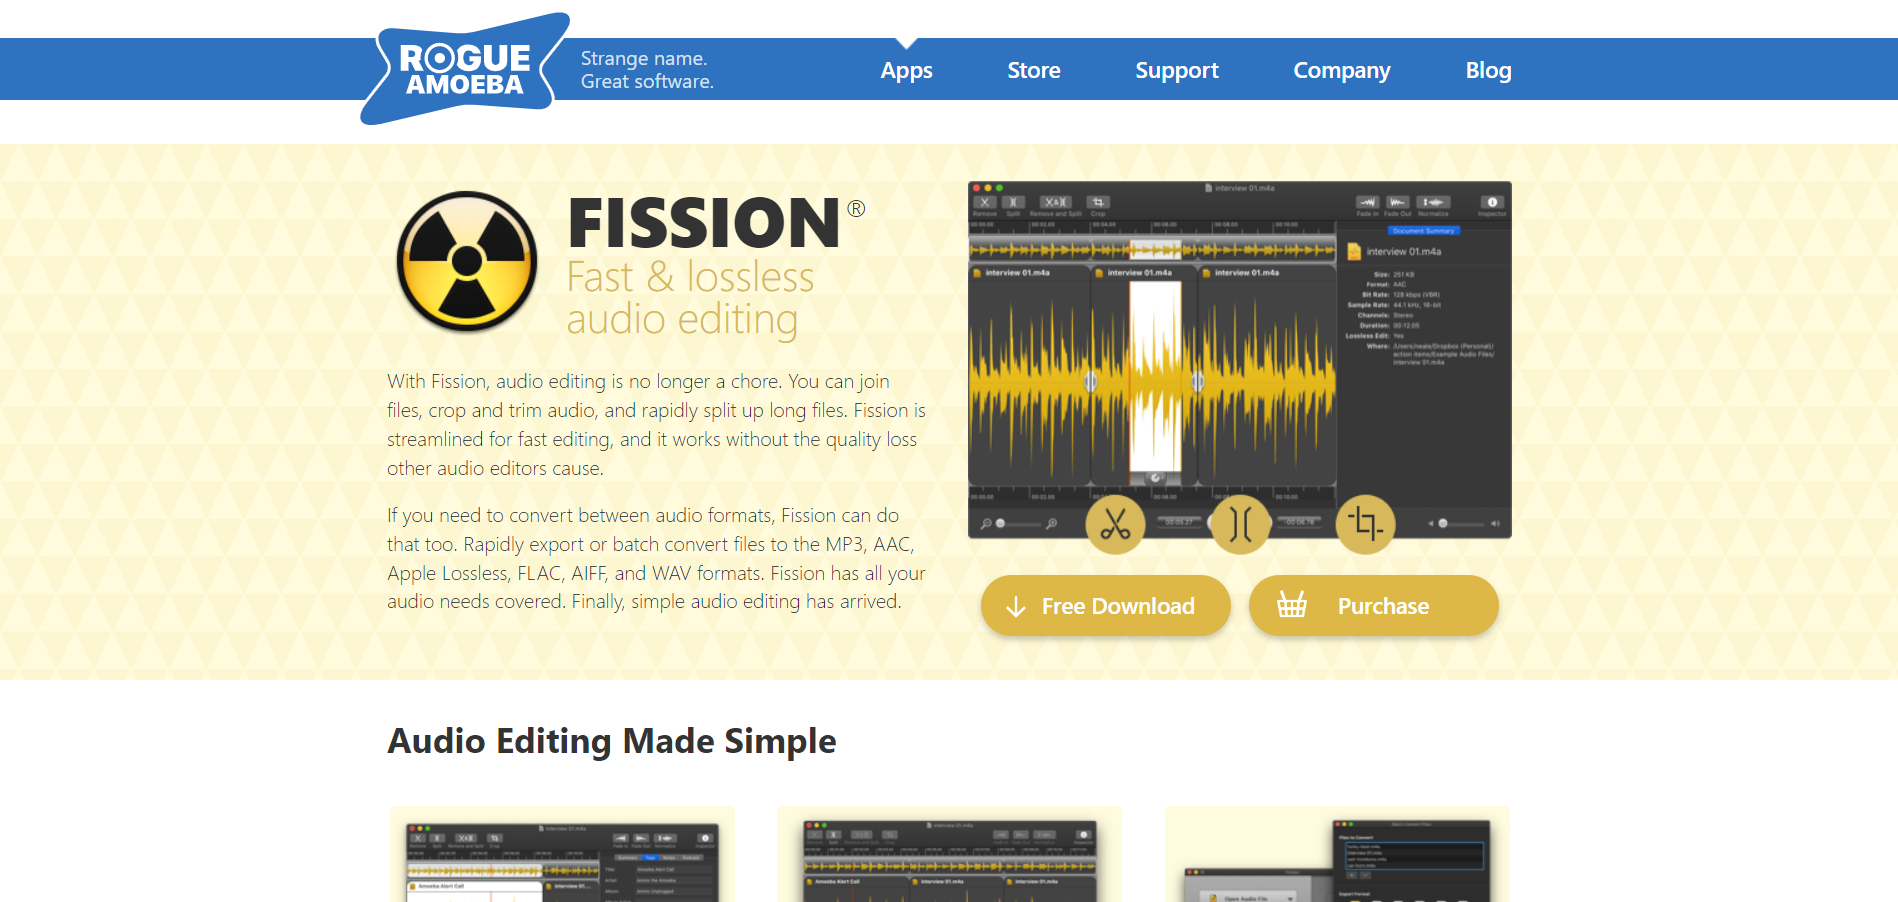 Fission main page